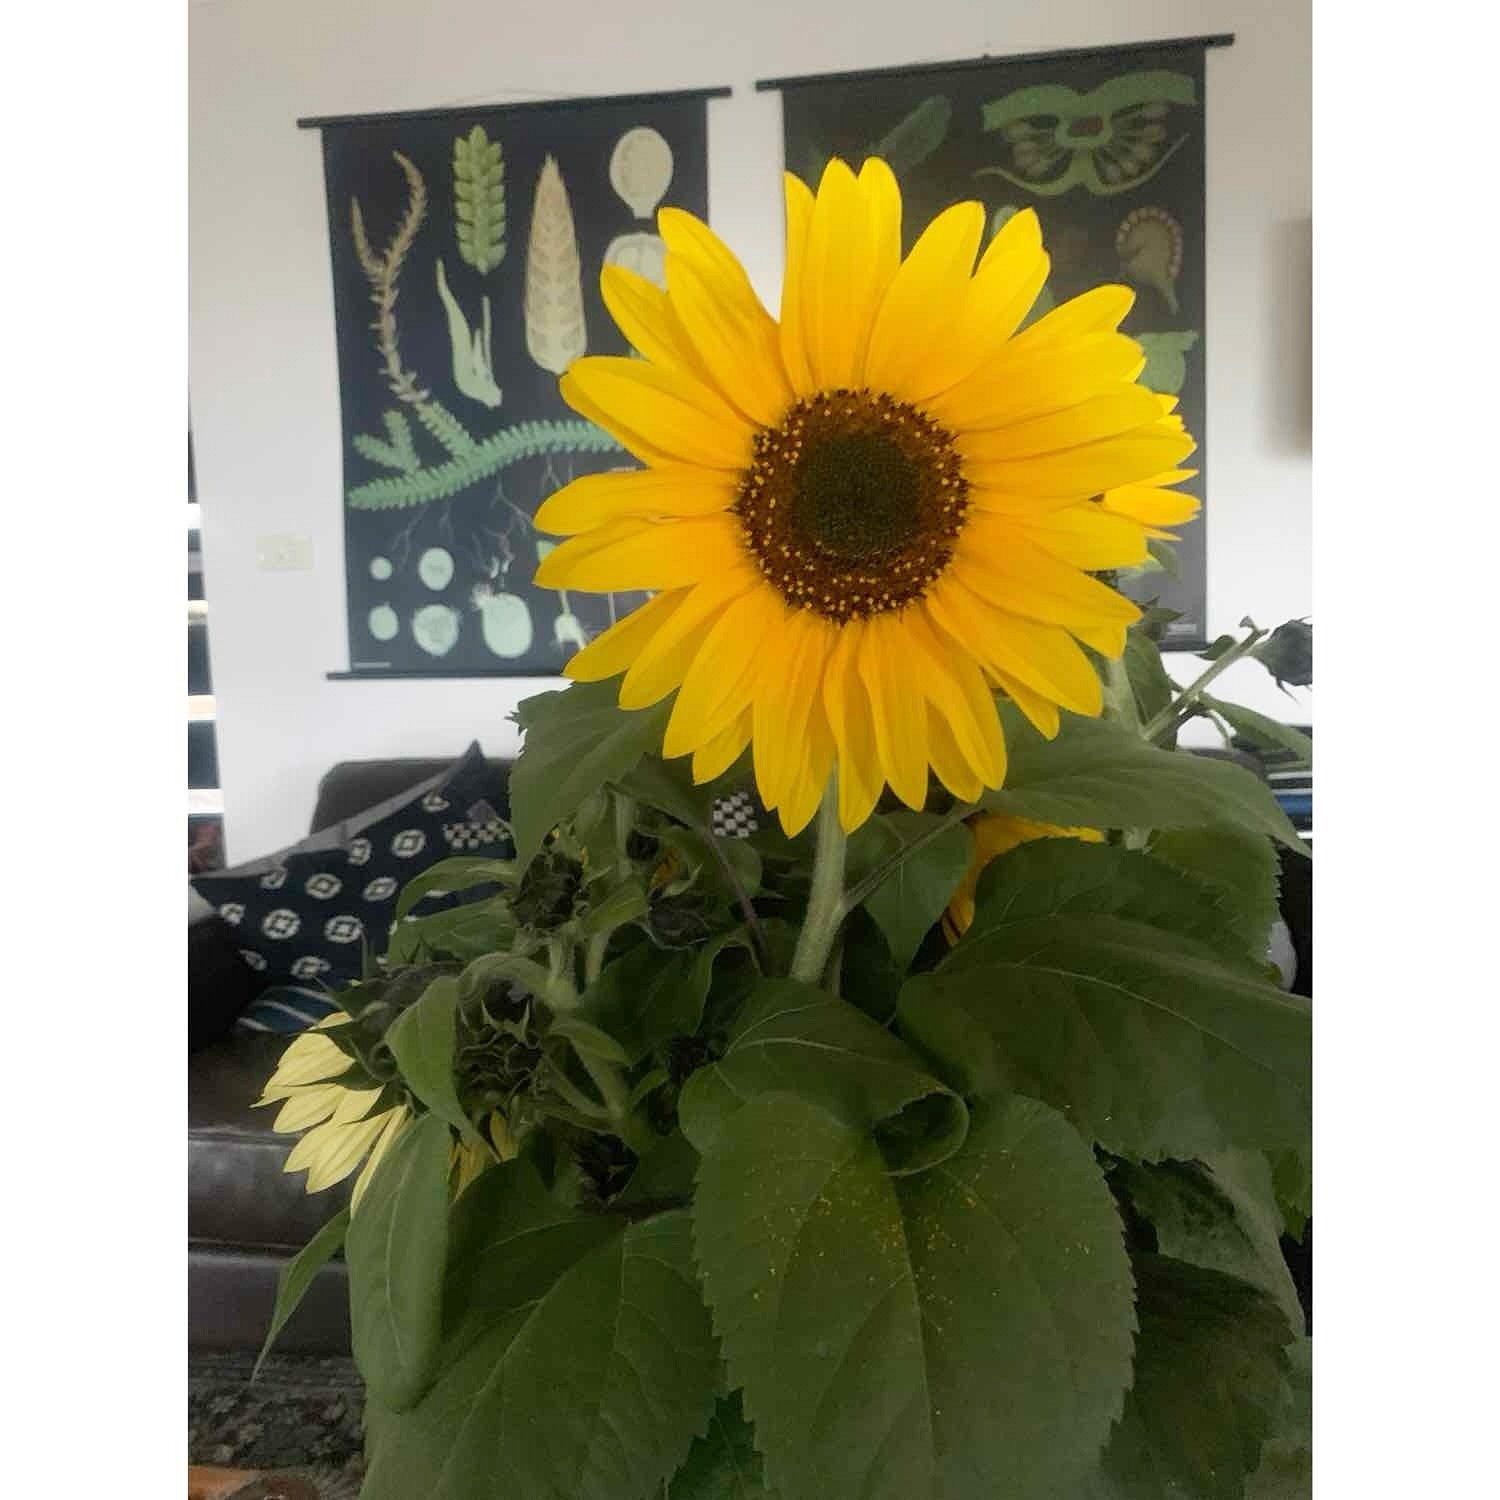 a sunflower for whoever needs it! 🌻 it&rsquo;s a bit of a scary world out there right now &amp; everyone is feeling it. kindness, compassion &amp; love is always the antidote, and speaking up BIG where you see injustices too!
In our small store, eve